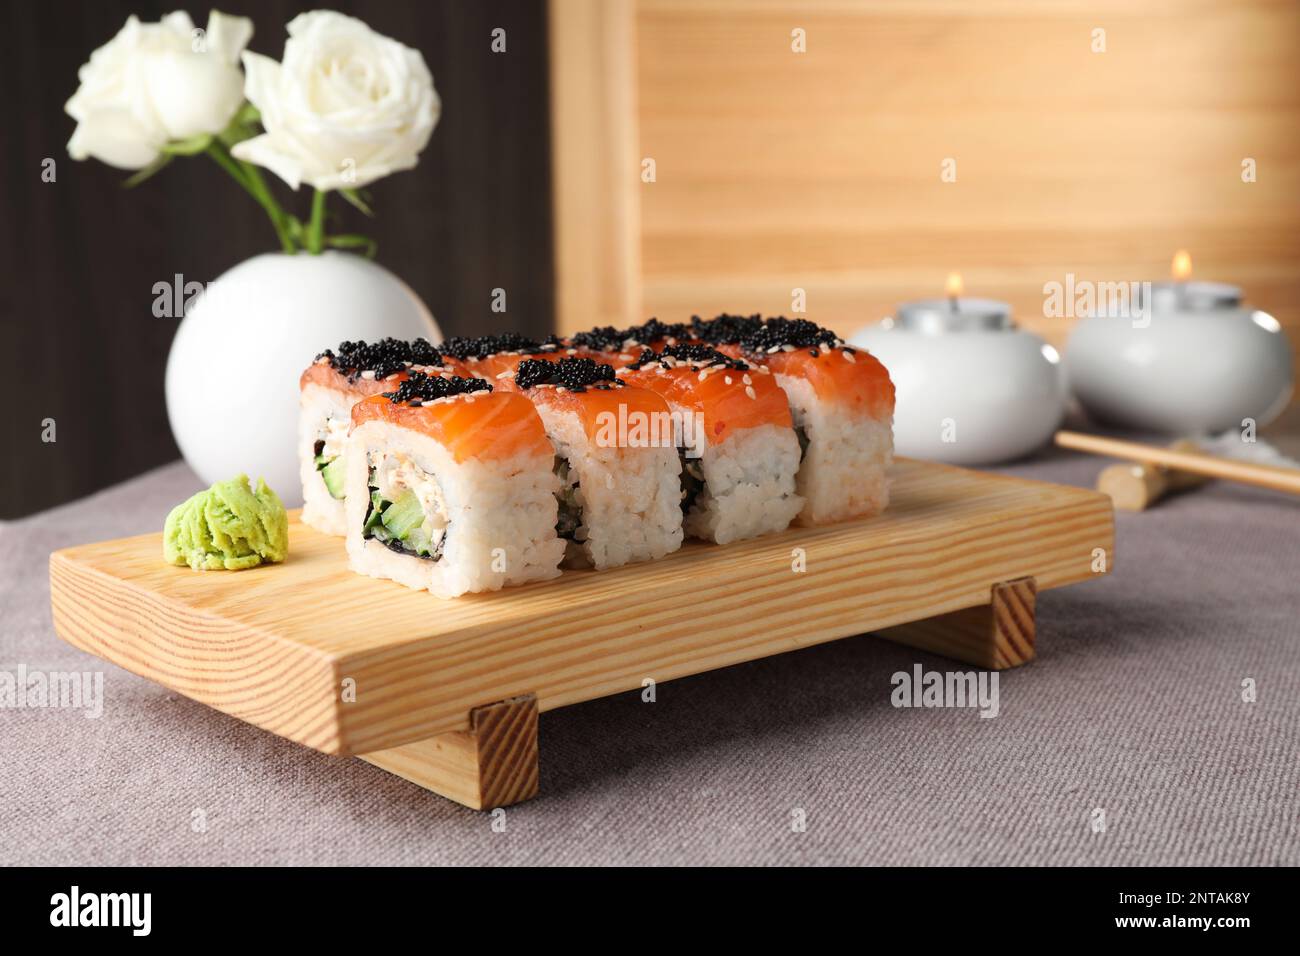 Delicious sushi rolls with salmon served on table Stock Photo